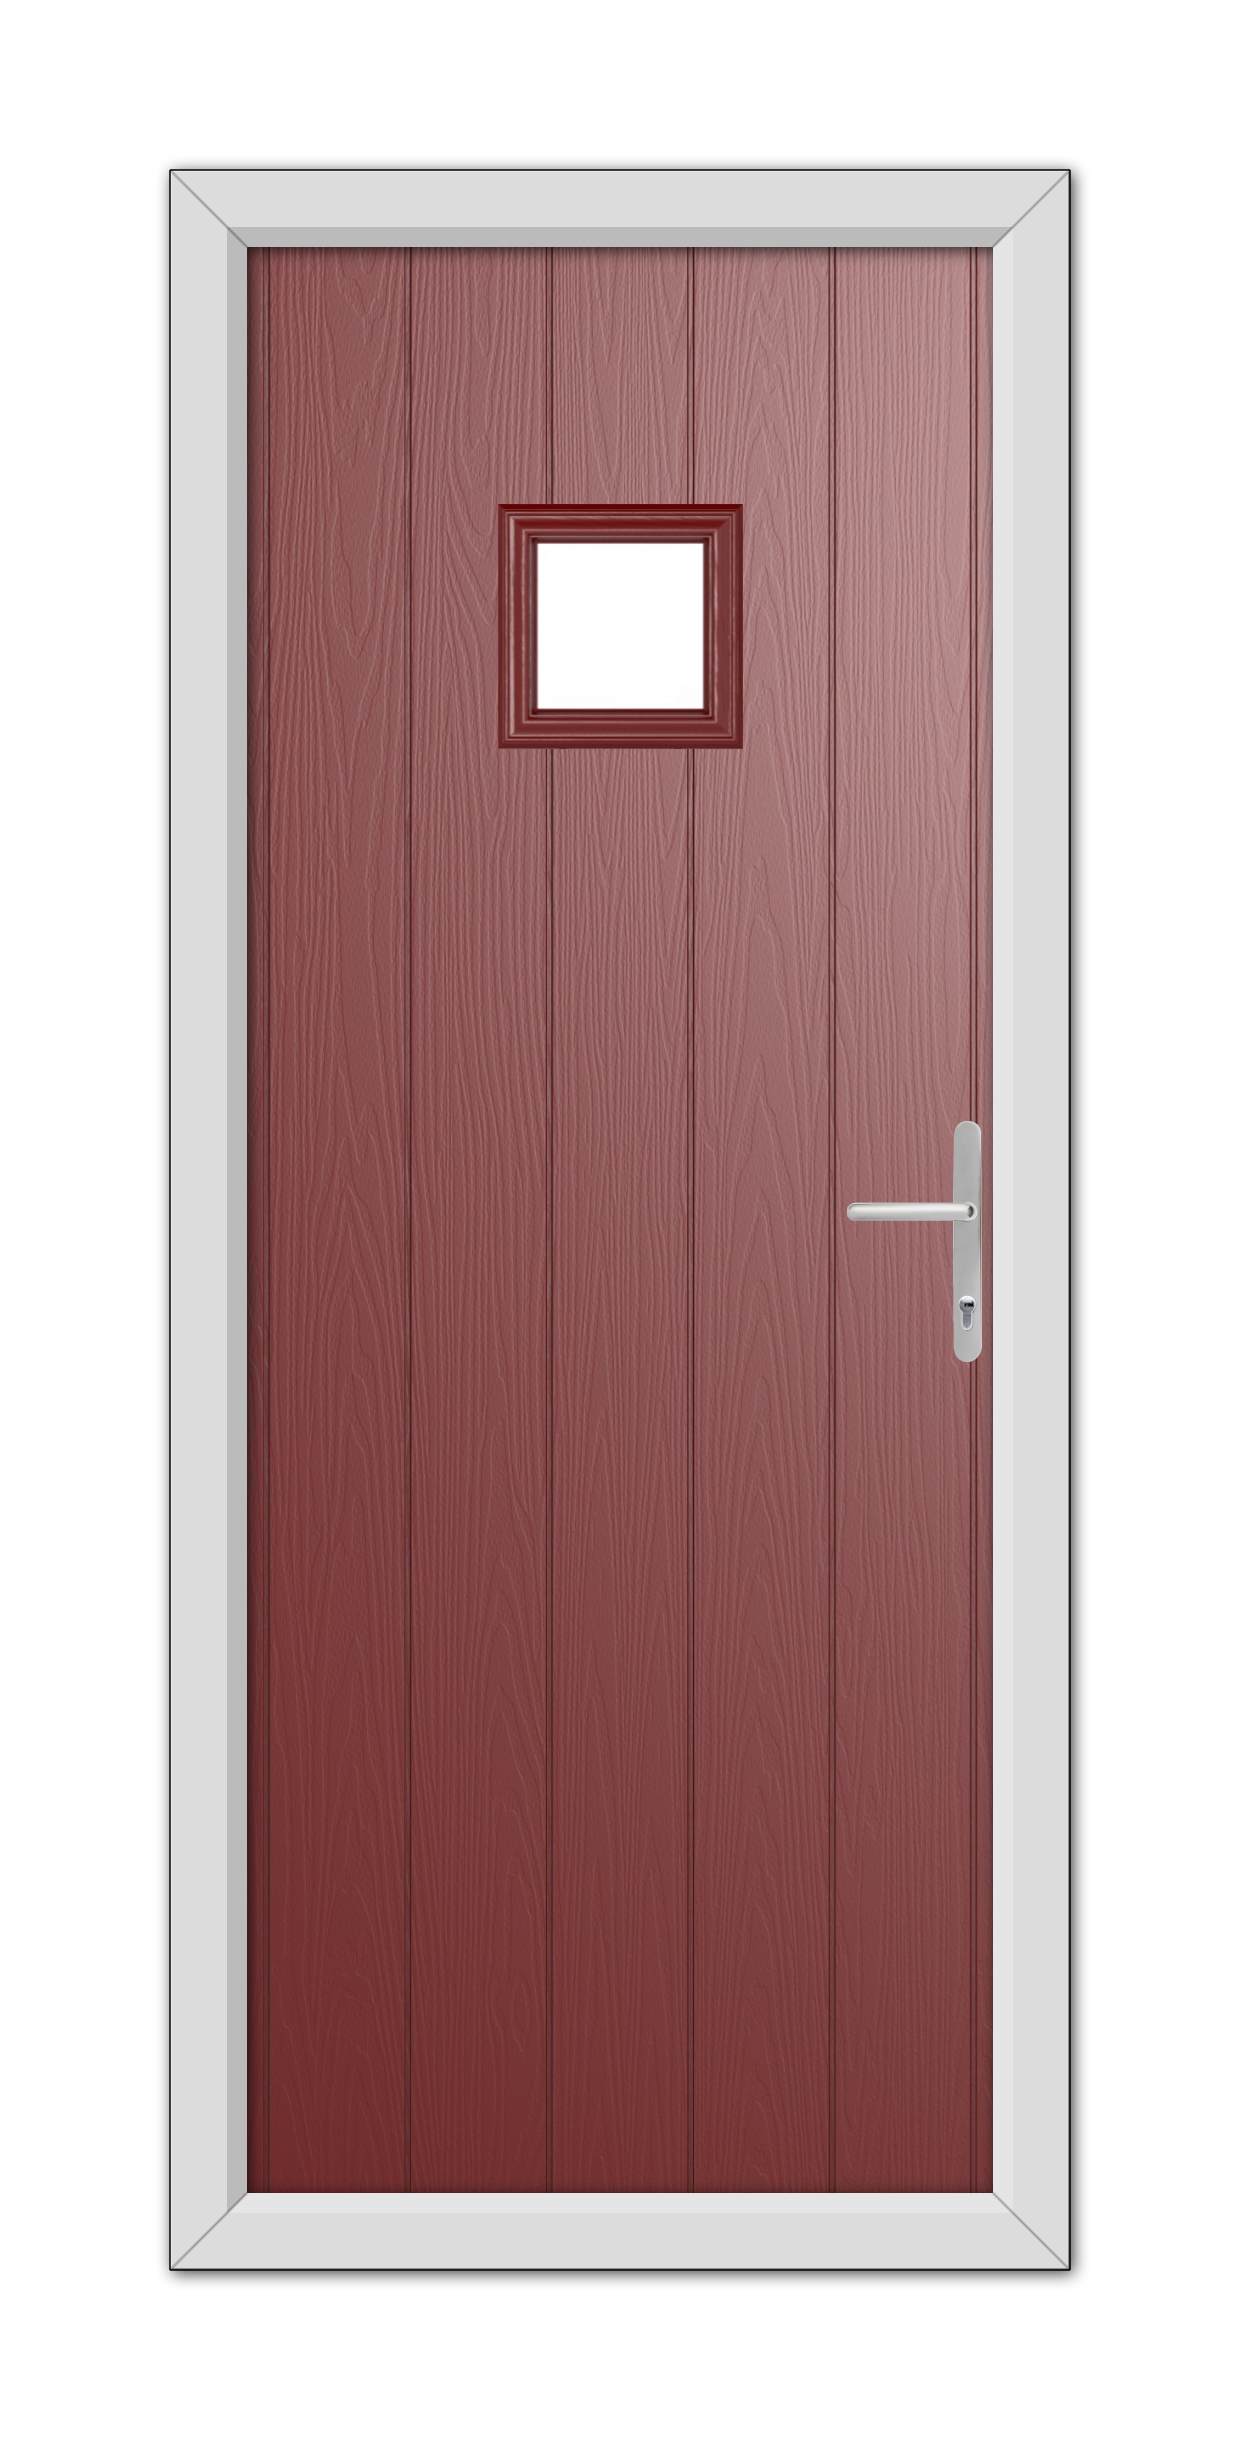 A Red Brampton Composite Door 48mm Timber Core with a small rectangular window at the top and a modern white handle, set within a white door frame.